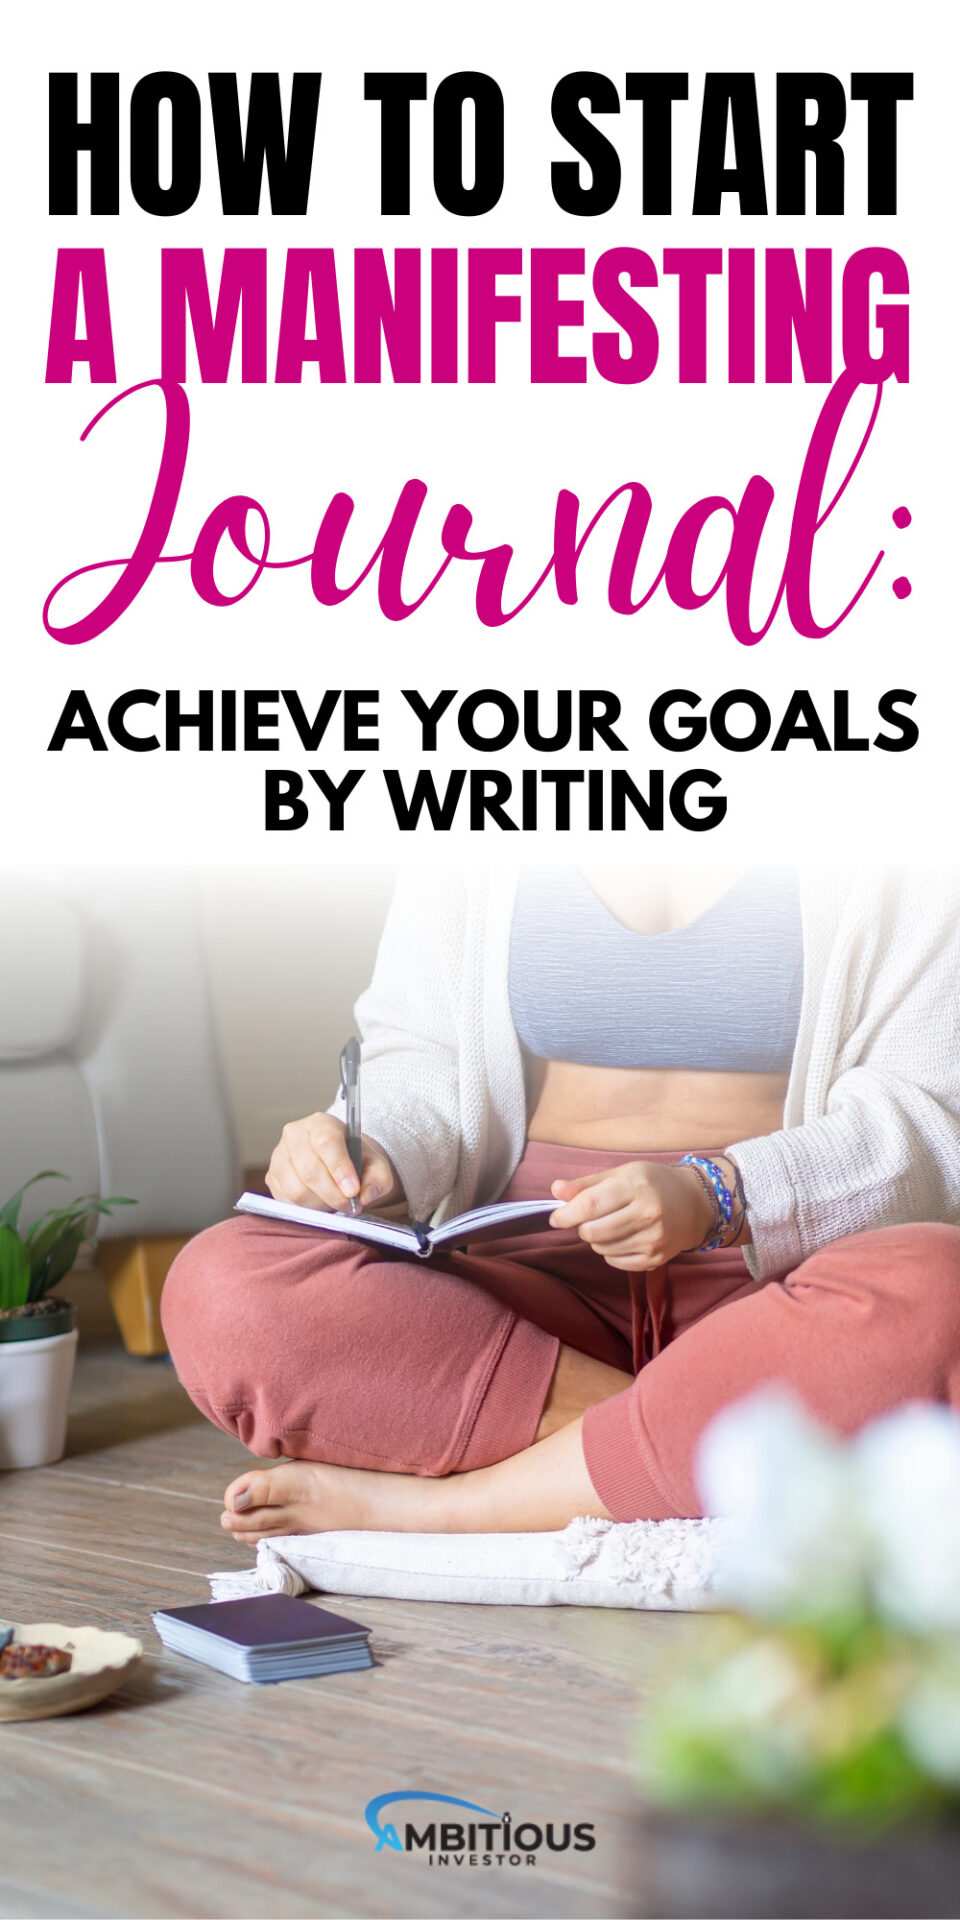 How to Start a Manifesting Journal: Achieve Your Goals by Writing